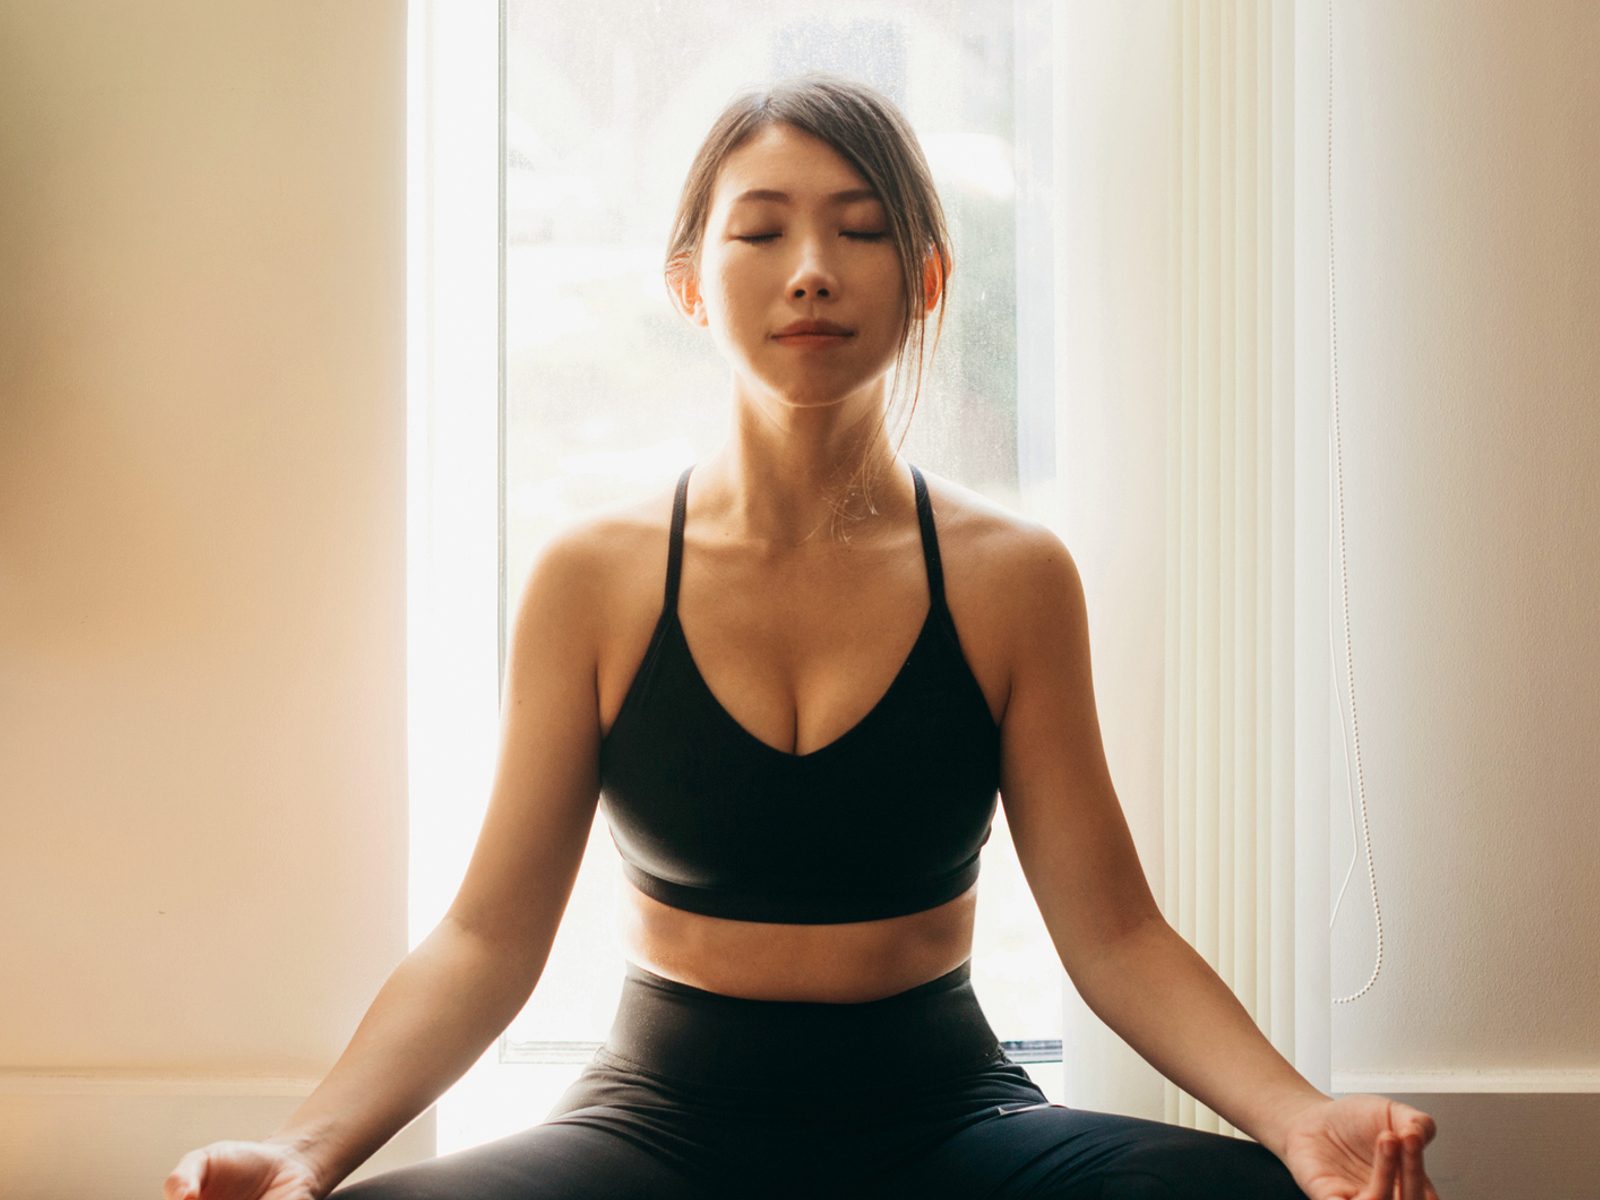 Meditation + Seated Yoga Poses to Relieve Anxiety | Yoga for Anxiety